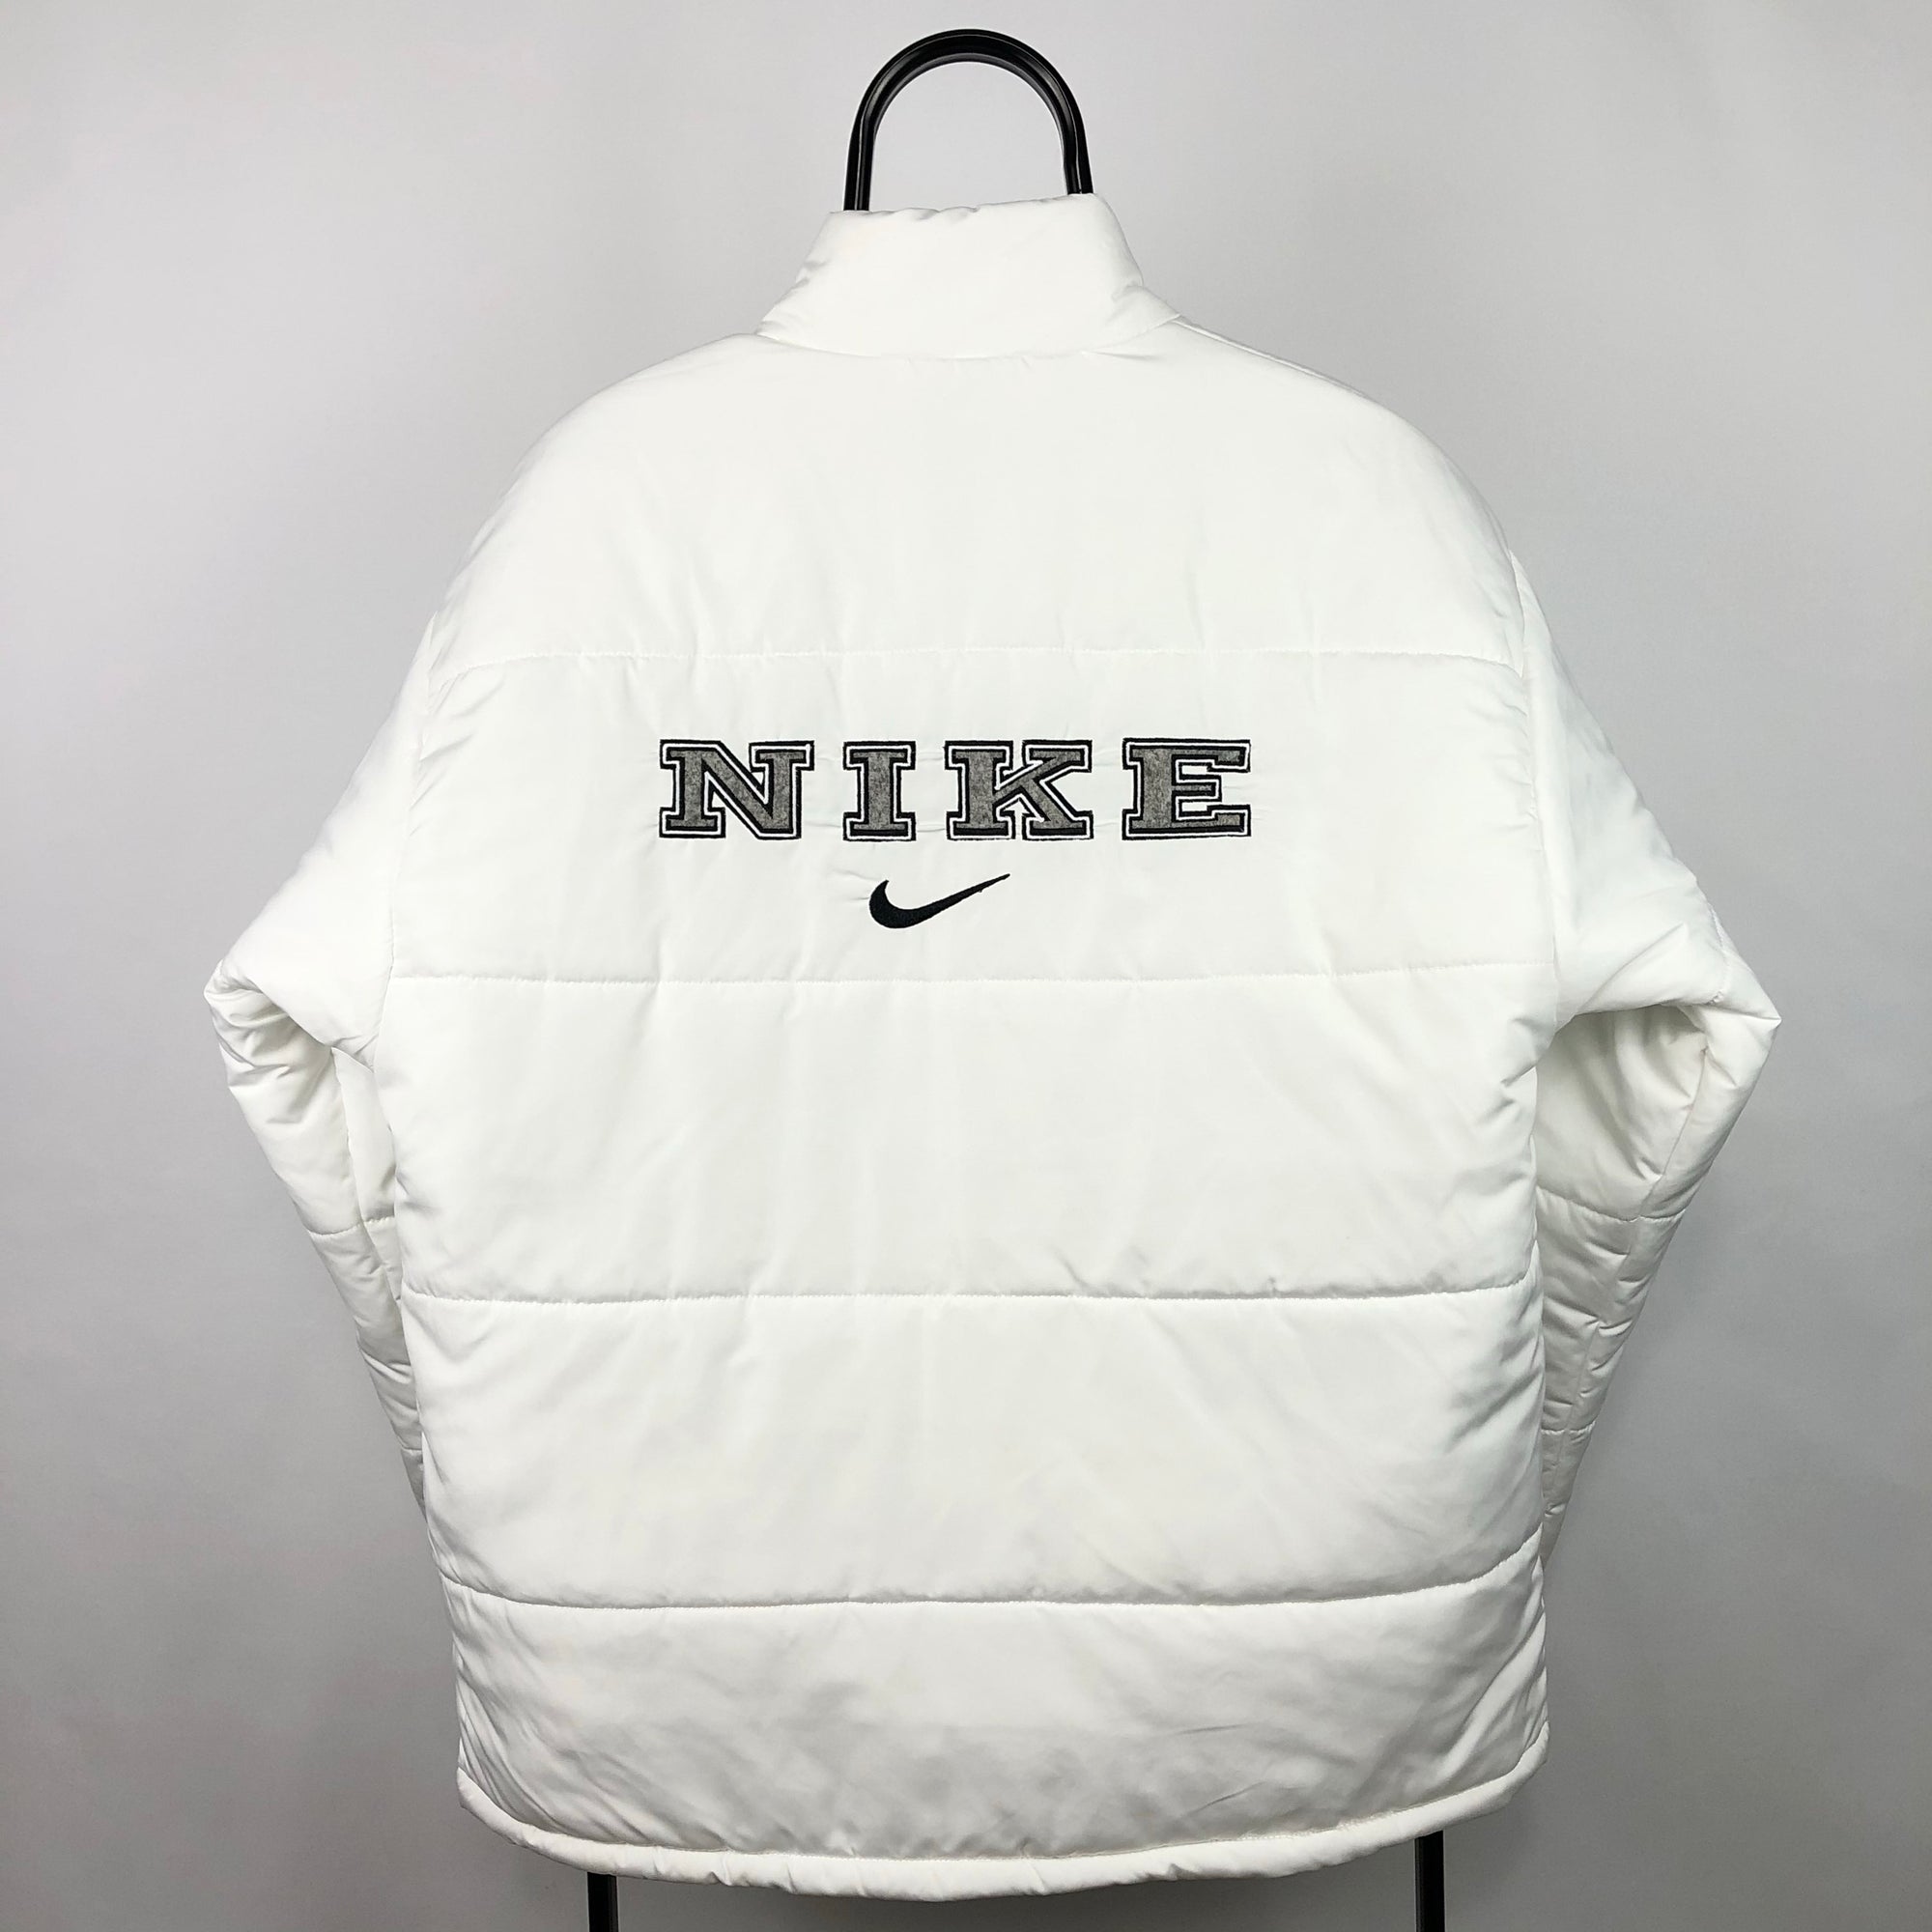 Nike Embroidered Spellout Puffer Jacket in White - Men's Medium/Women's Large